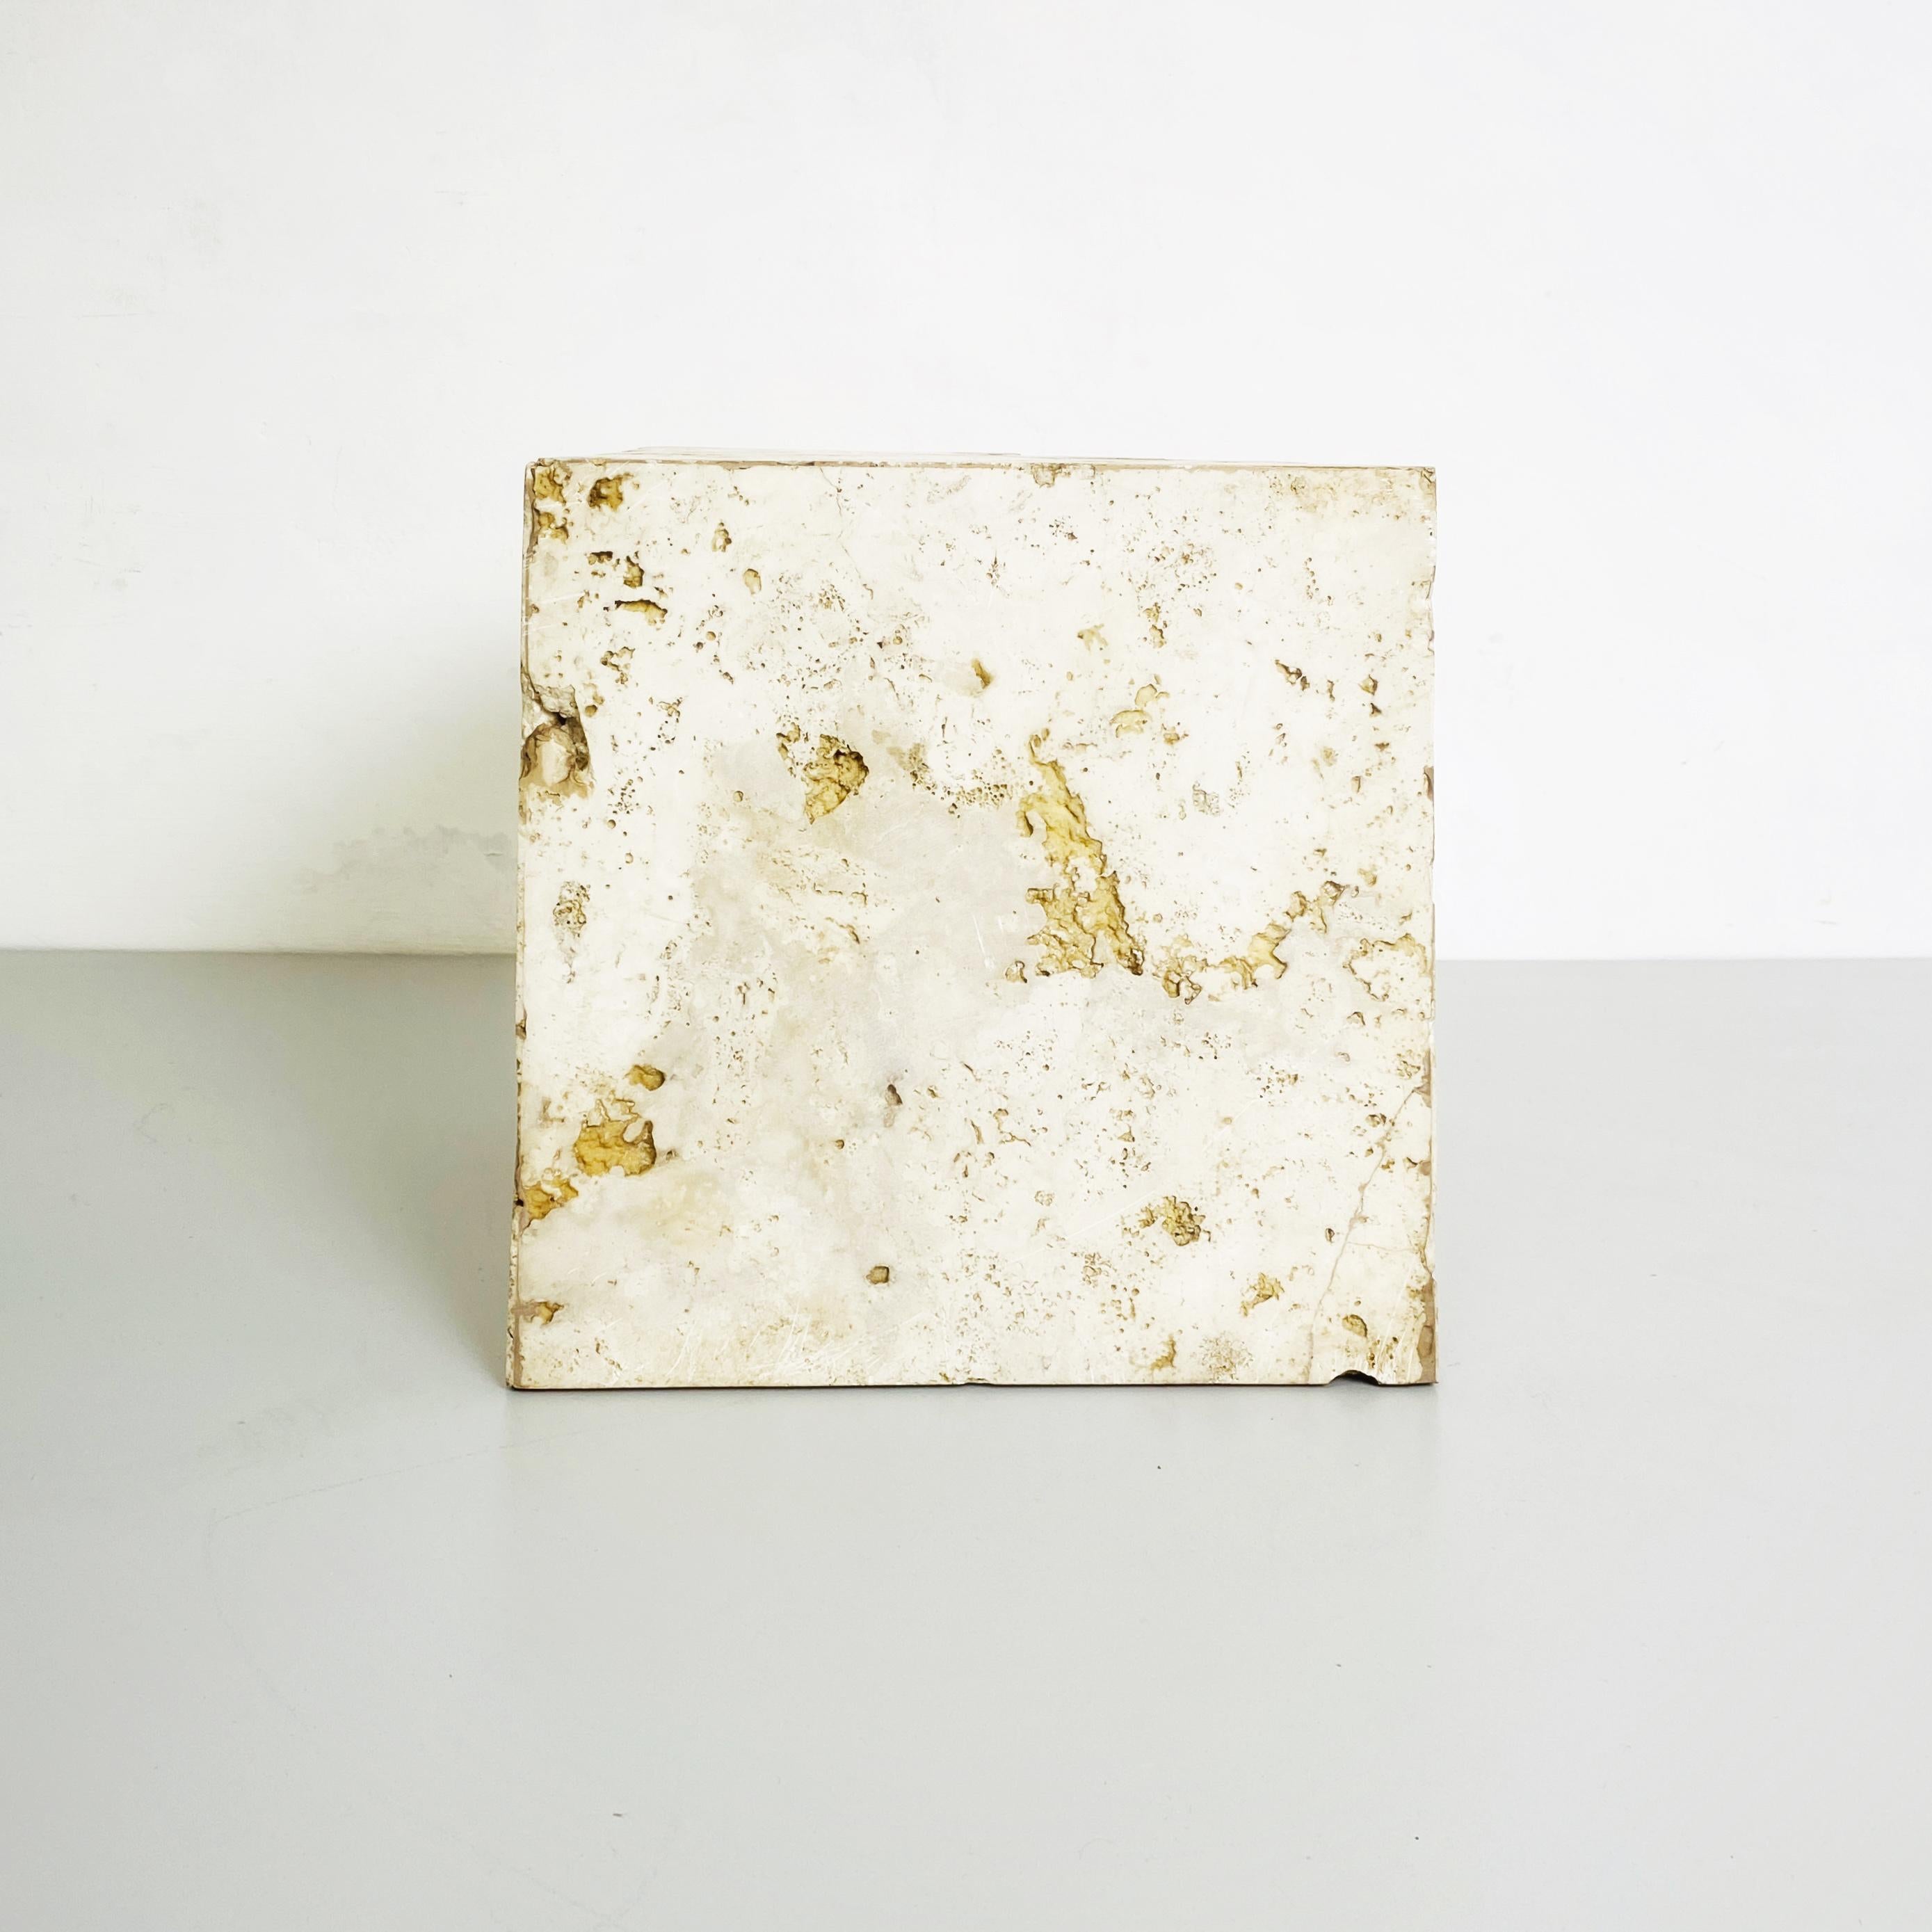 Italian Mid-Century Modern Travertine Sculpture by Pacini, 2000s For Sale 4